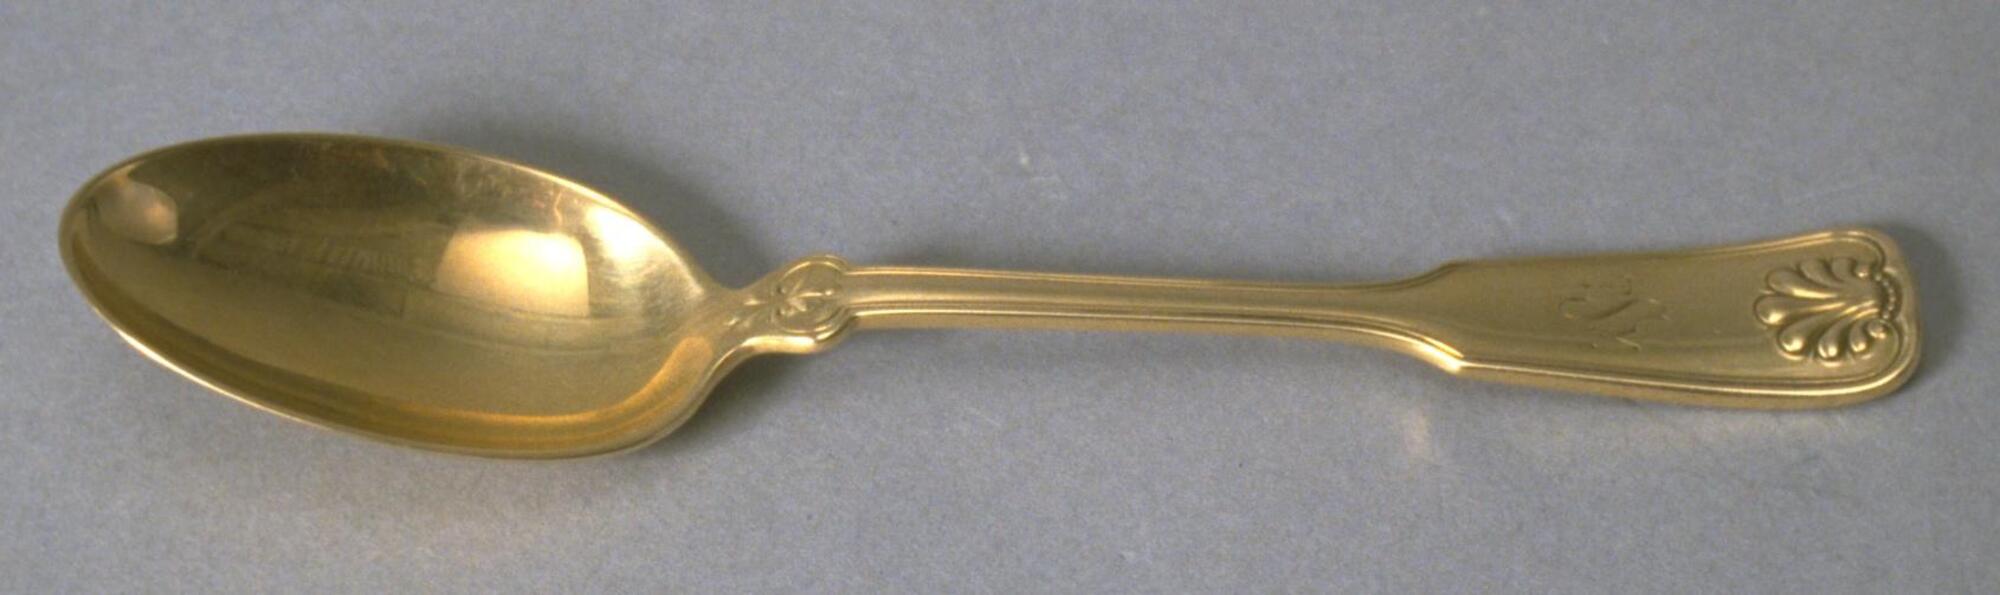 Gold spoon with thin handle that widens at the end with a decorative element at the tip